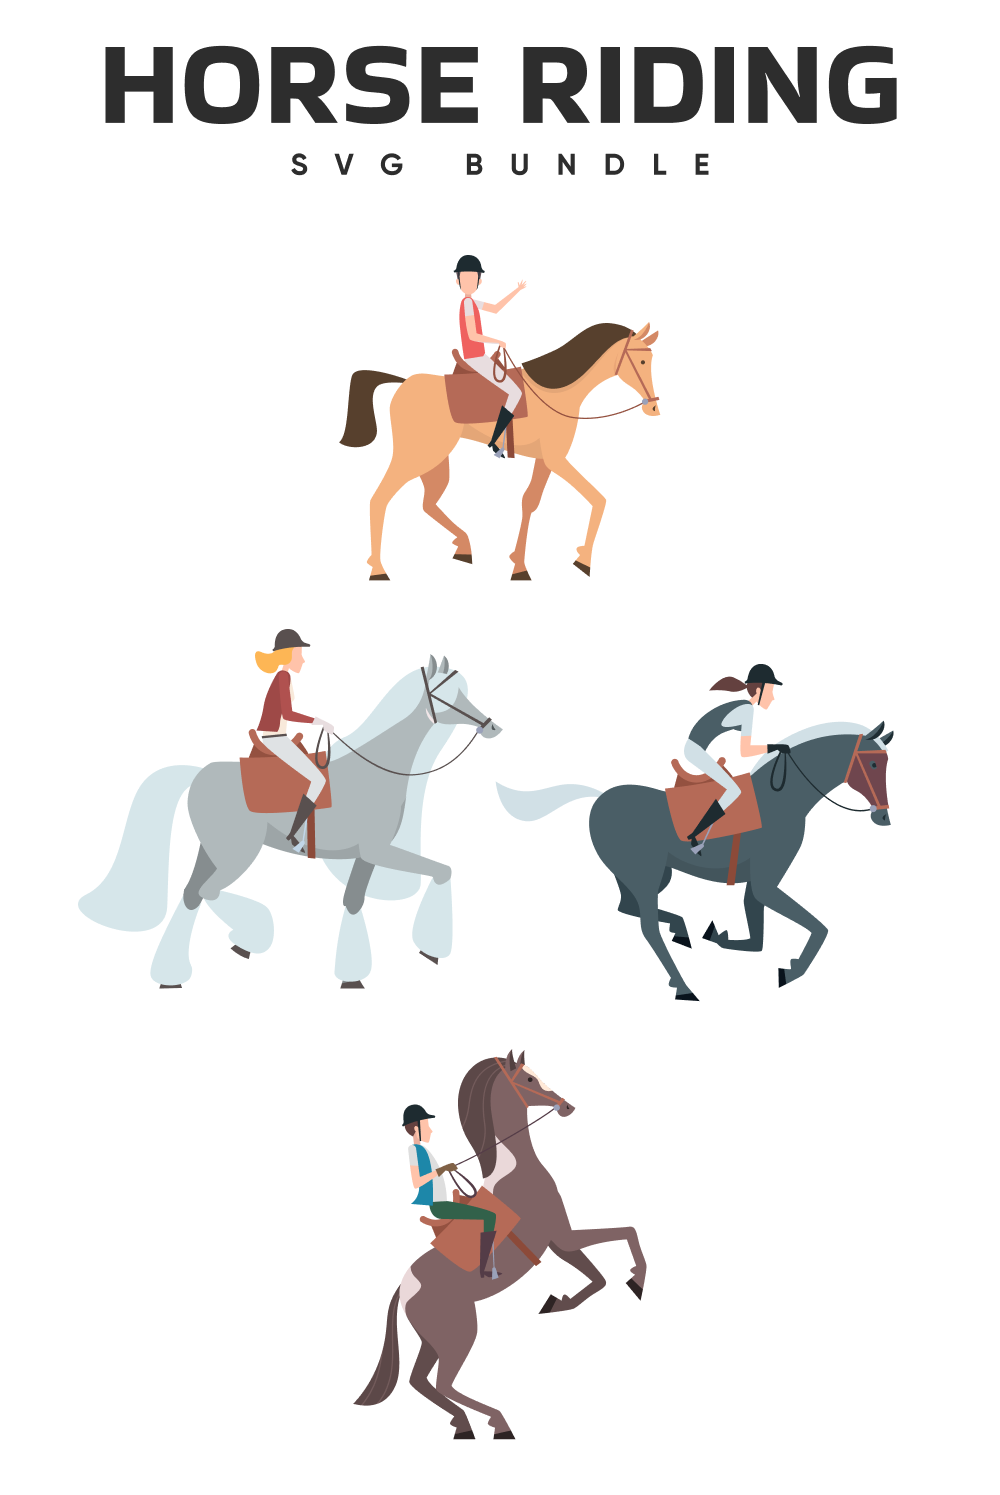 Group of people riding horses on a white background.